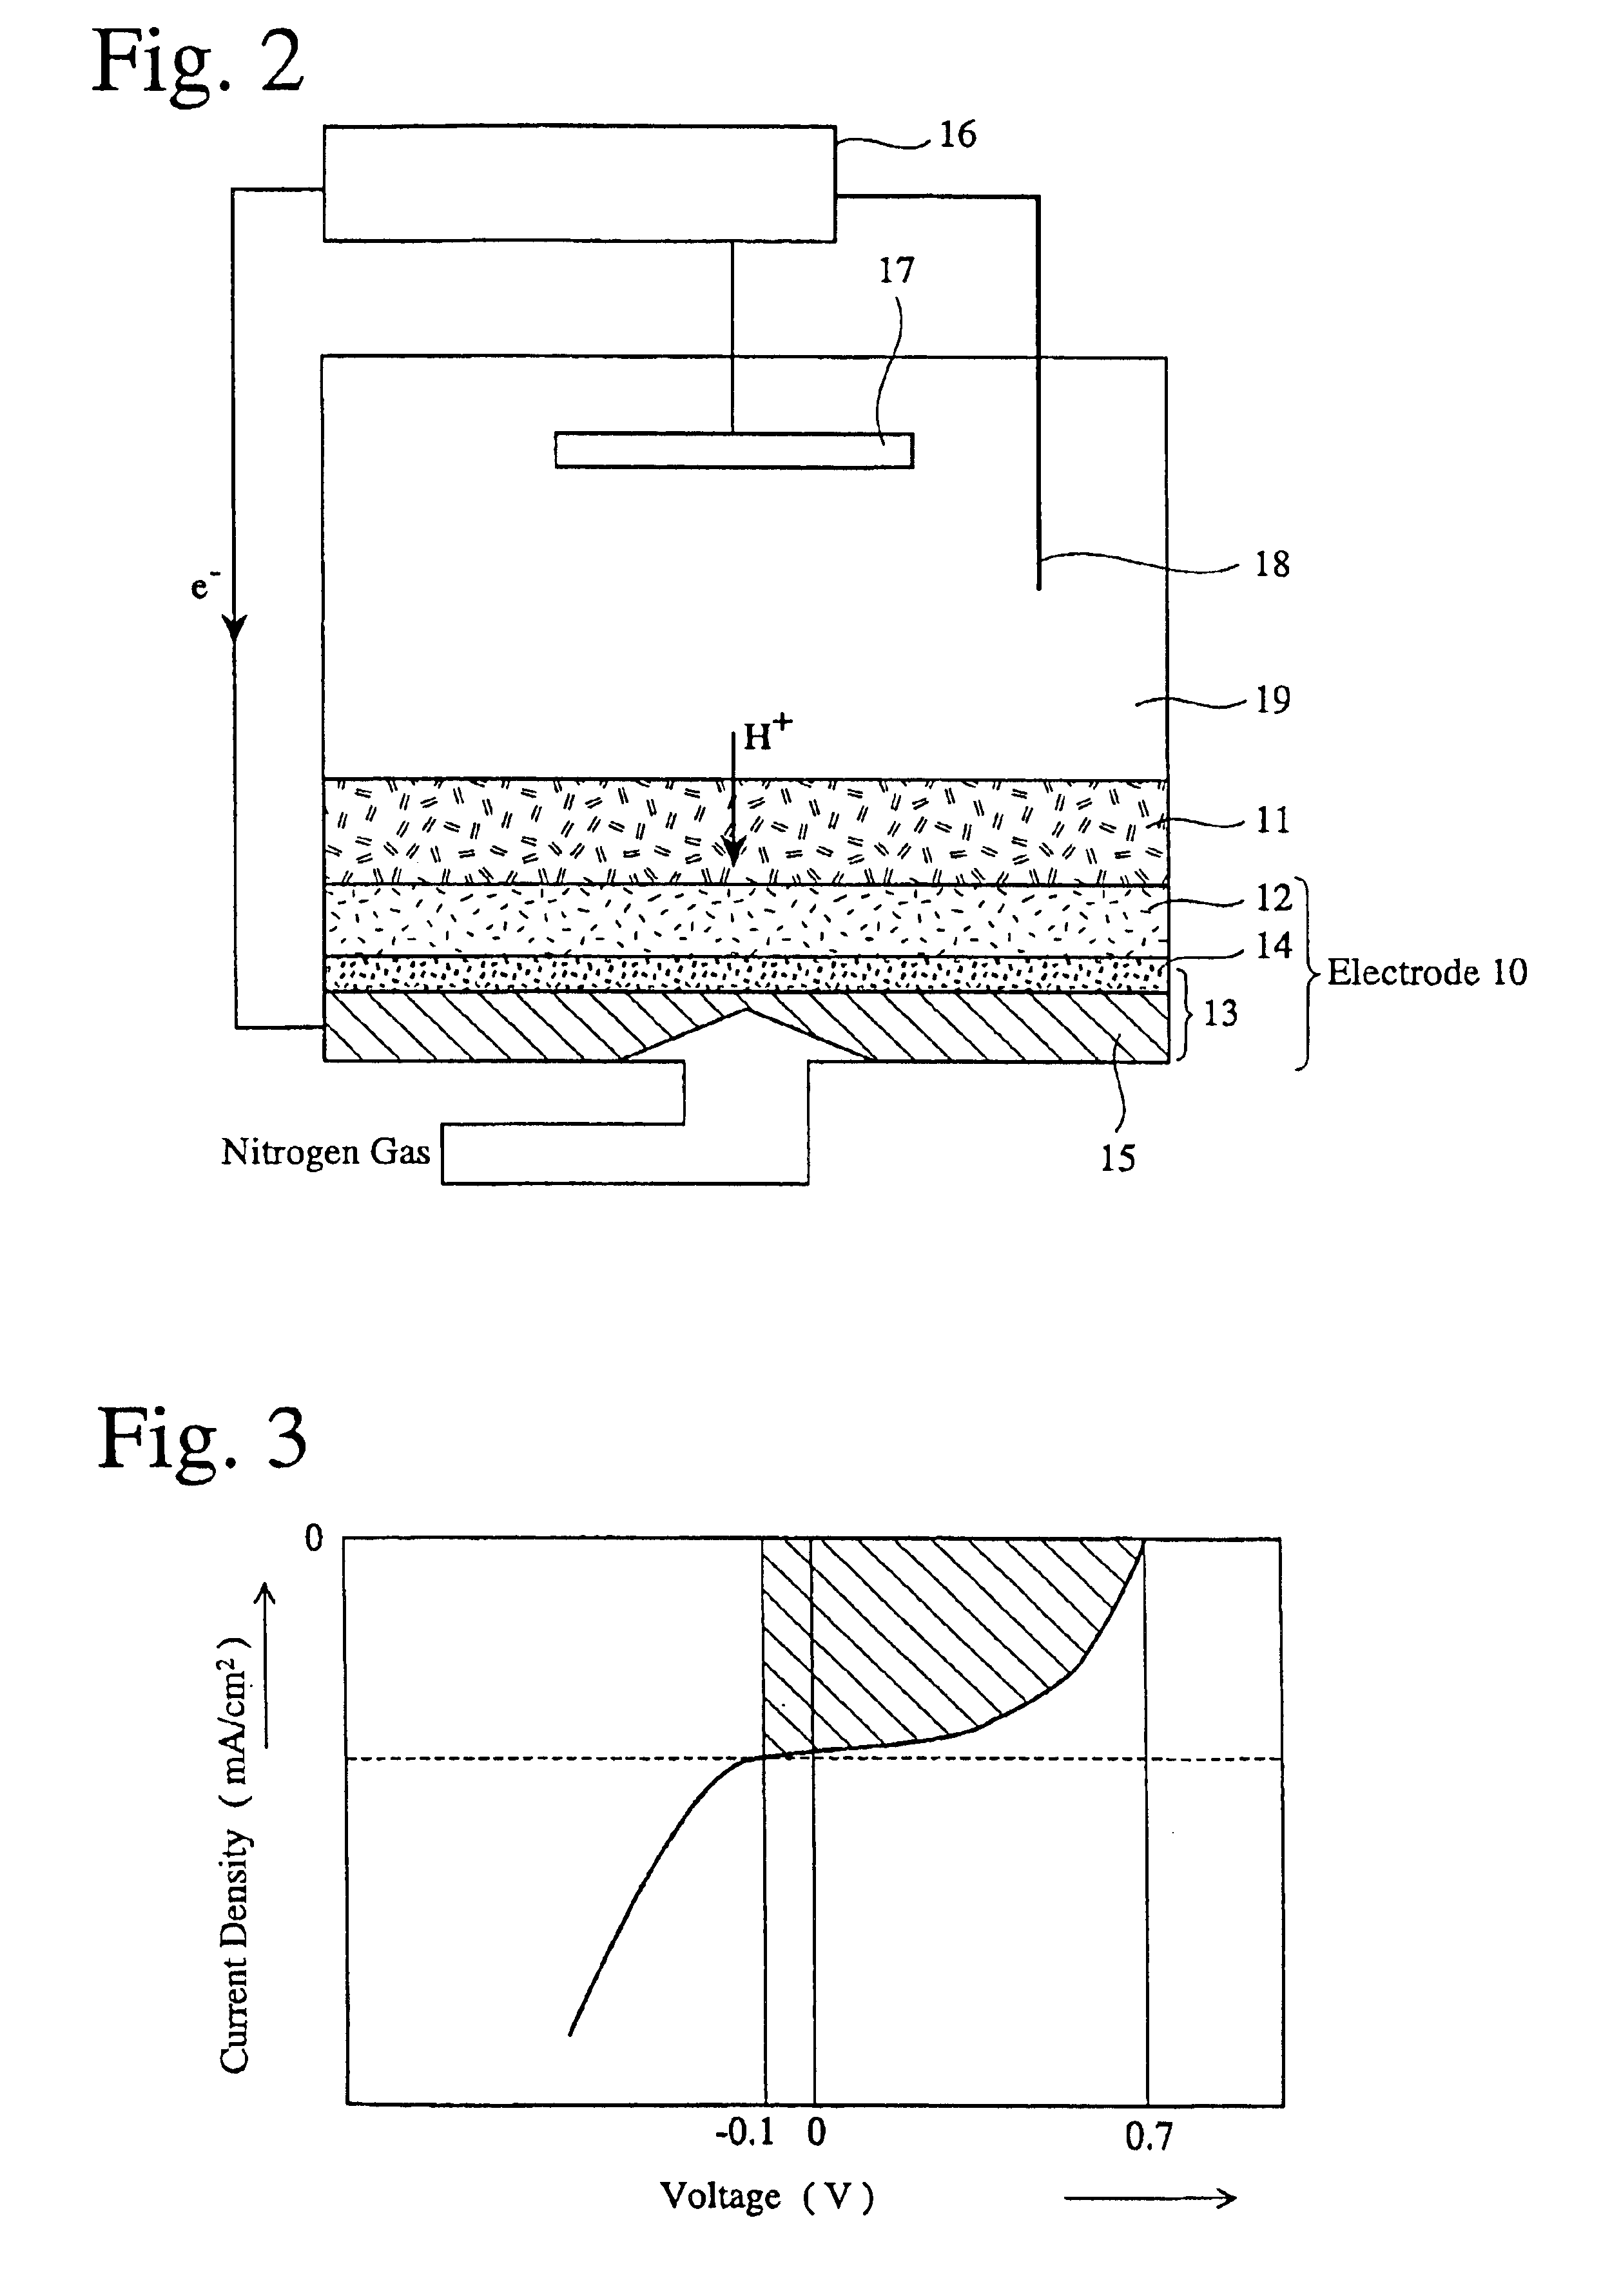 Polymer electrolyte membrane, method for producing same, and membrane electrode assembly and polymer electrolyte fuel cell comprising same